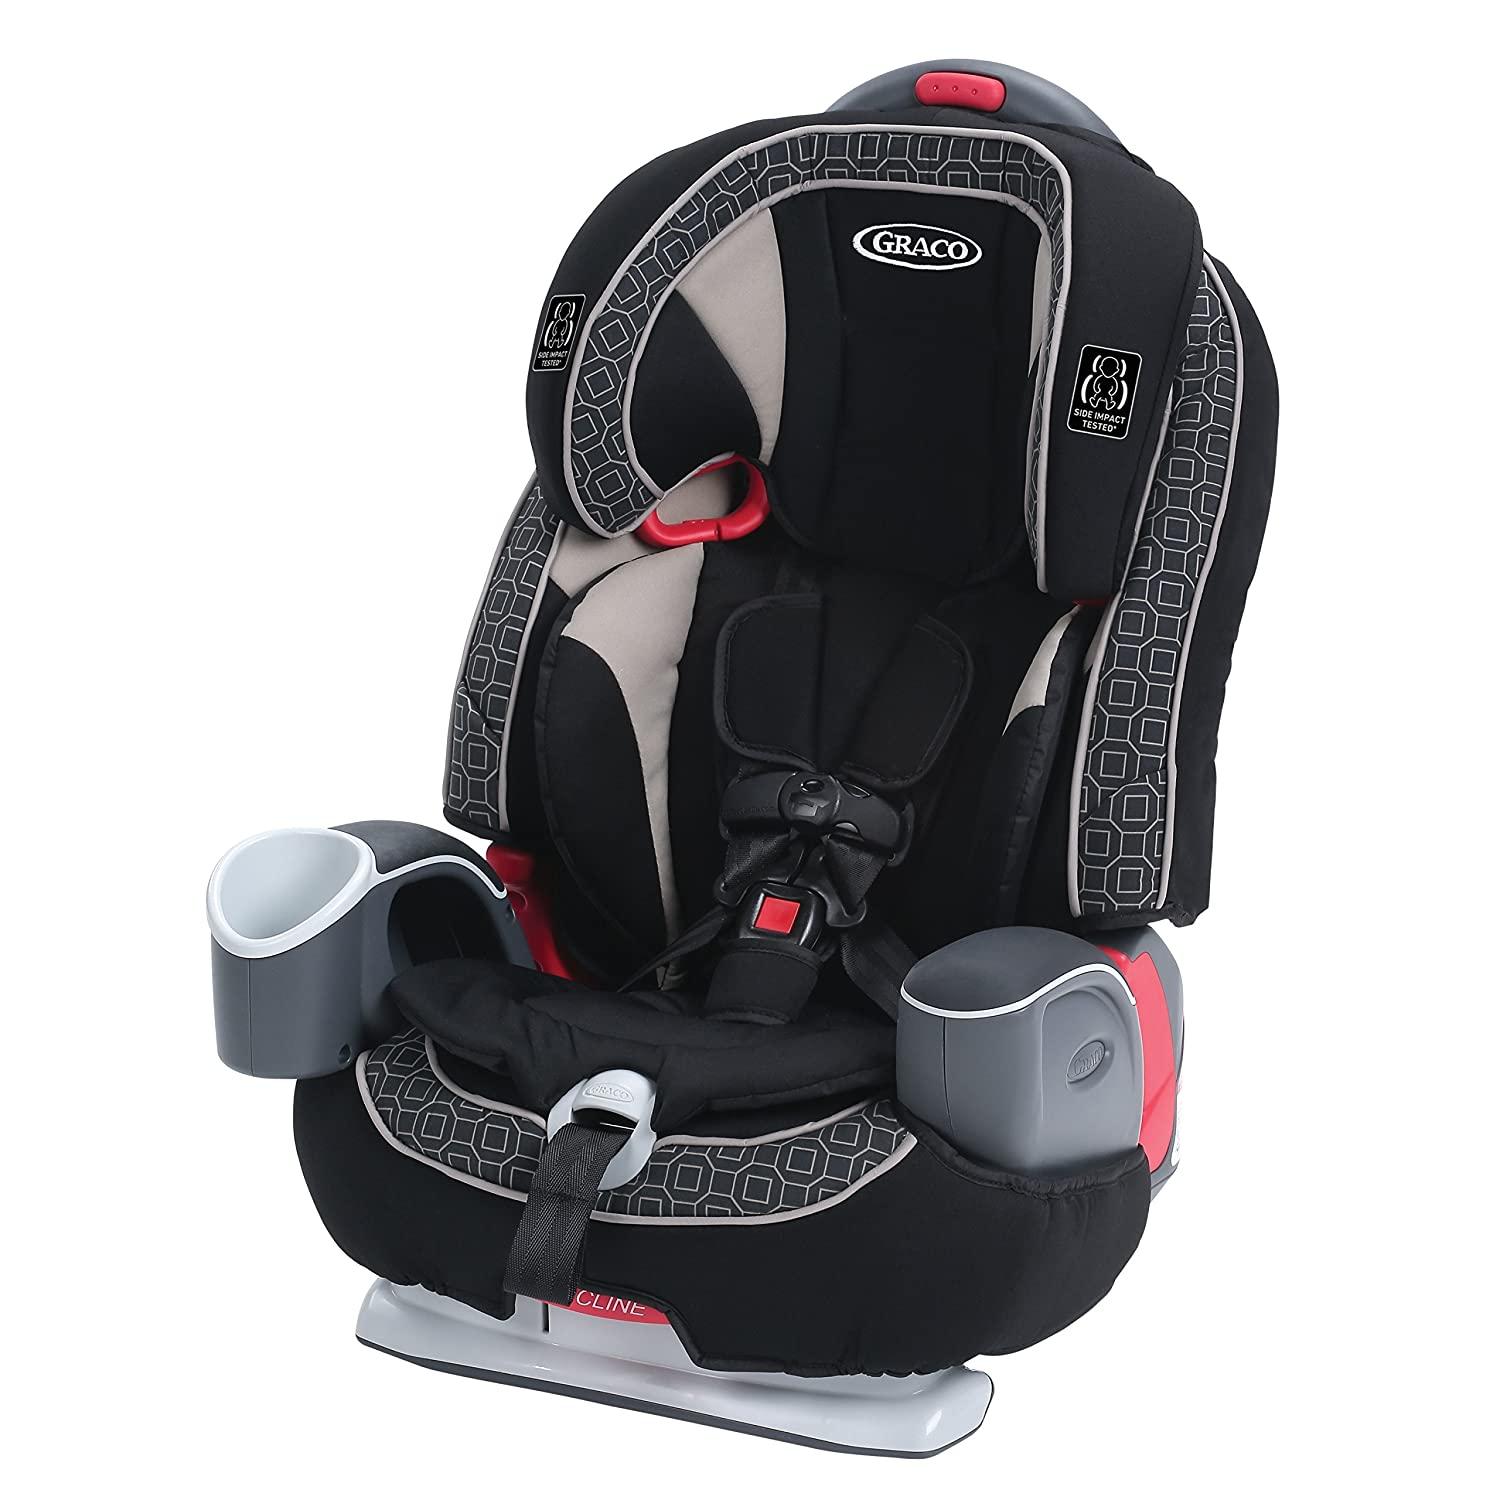 Graco Nautilus 65 LX 3-in-1 Harness Booster Car Seat for $95.62 Shipped